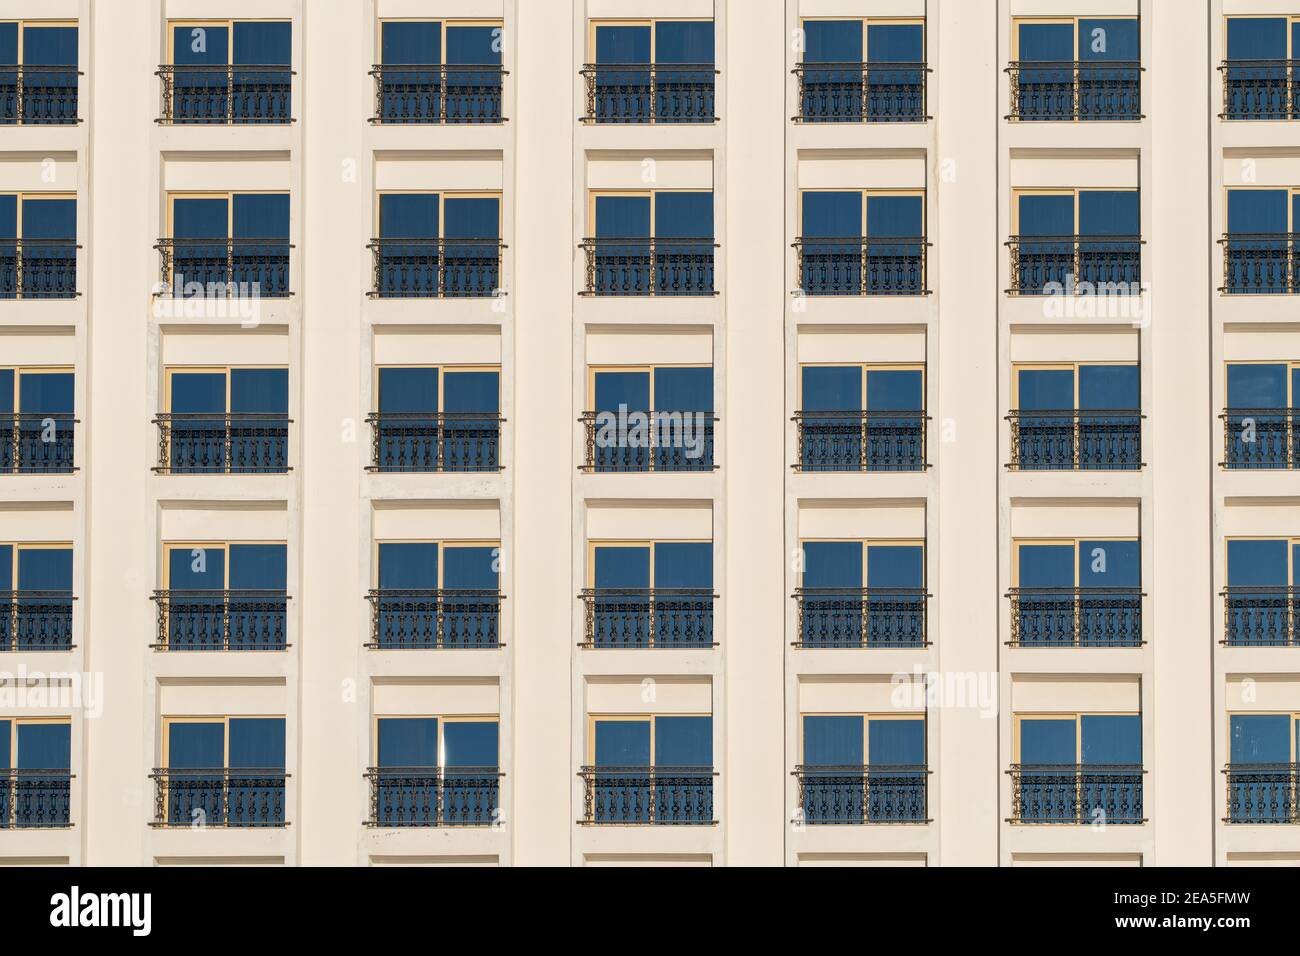 Hotel building facade with many windows on white wall Stock Photo